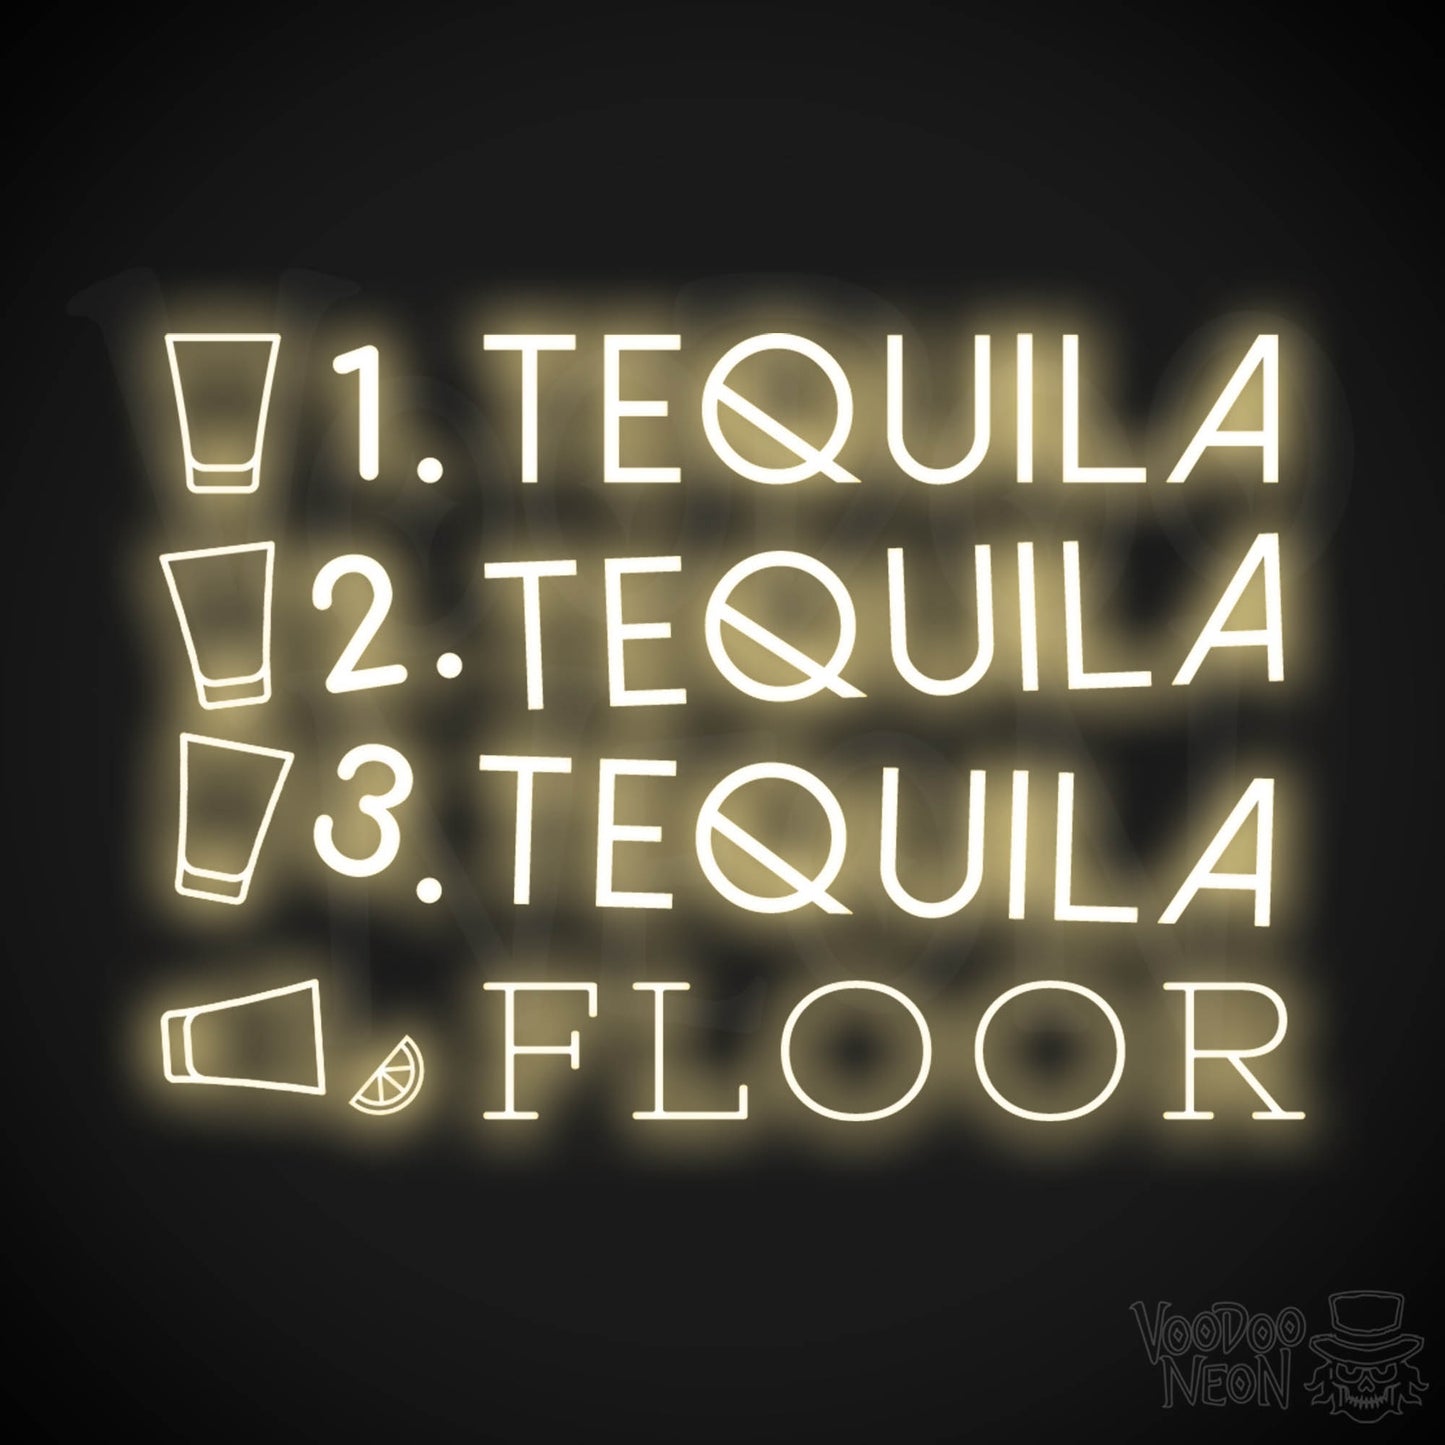 One Tequila Two Tequila Three Tequila Floor Neon sign - Neon Wall Art - Color Warm White